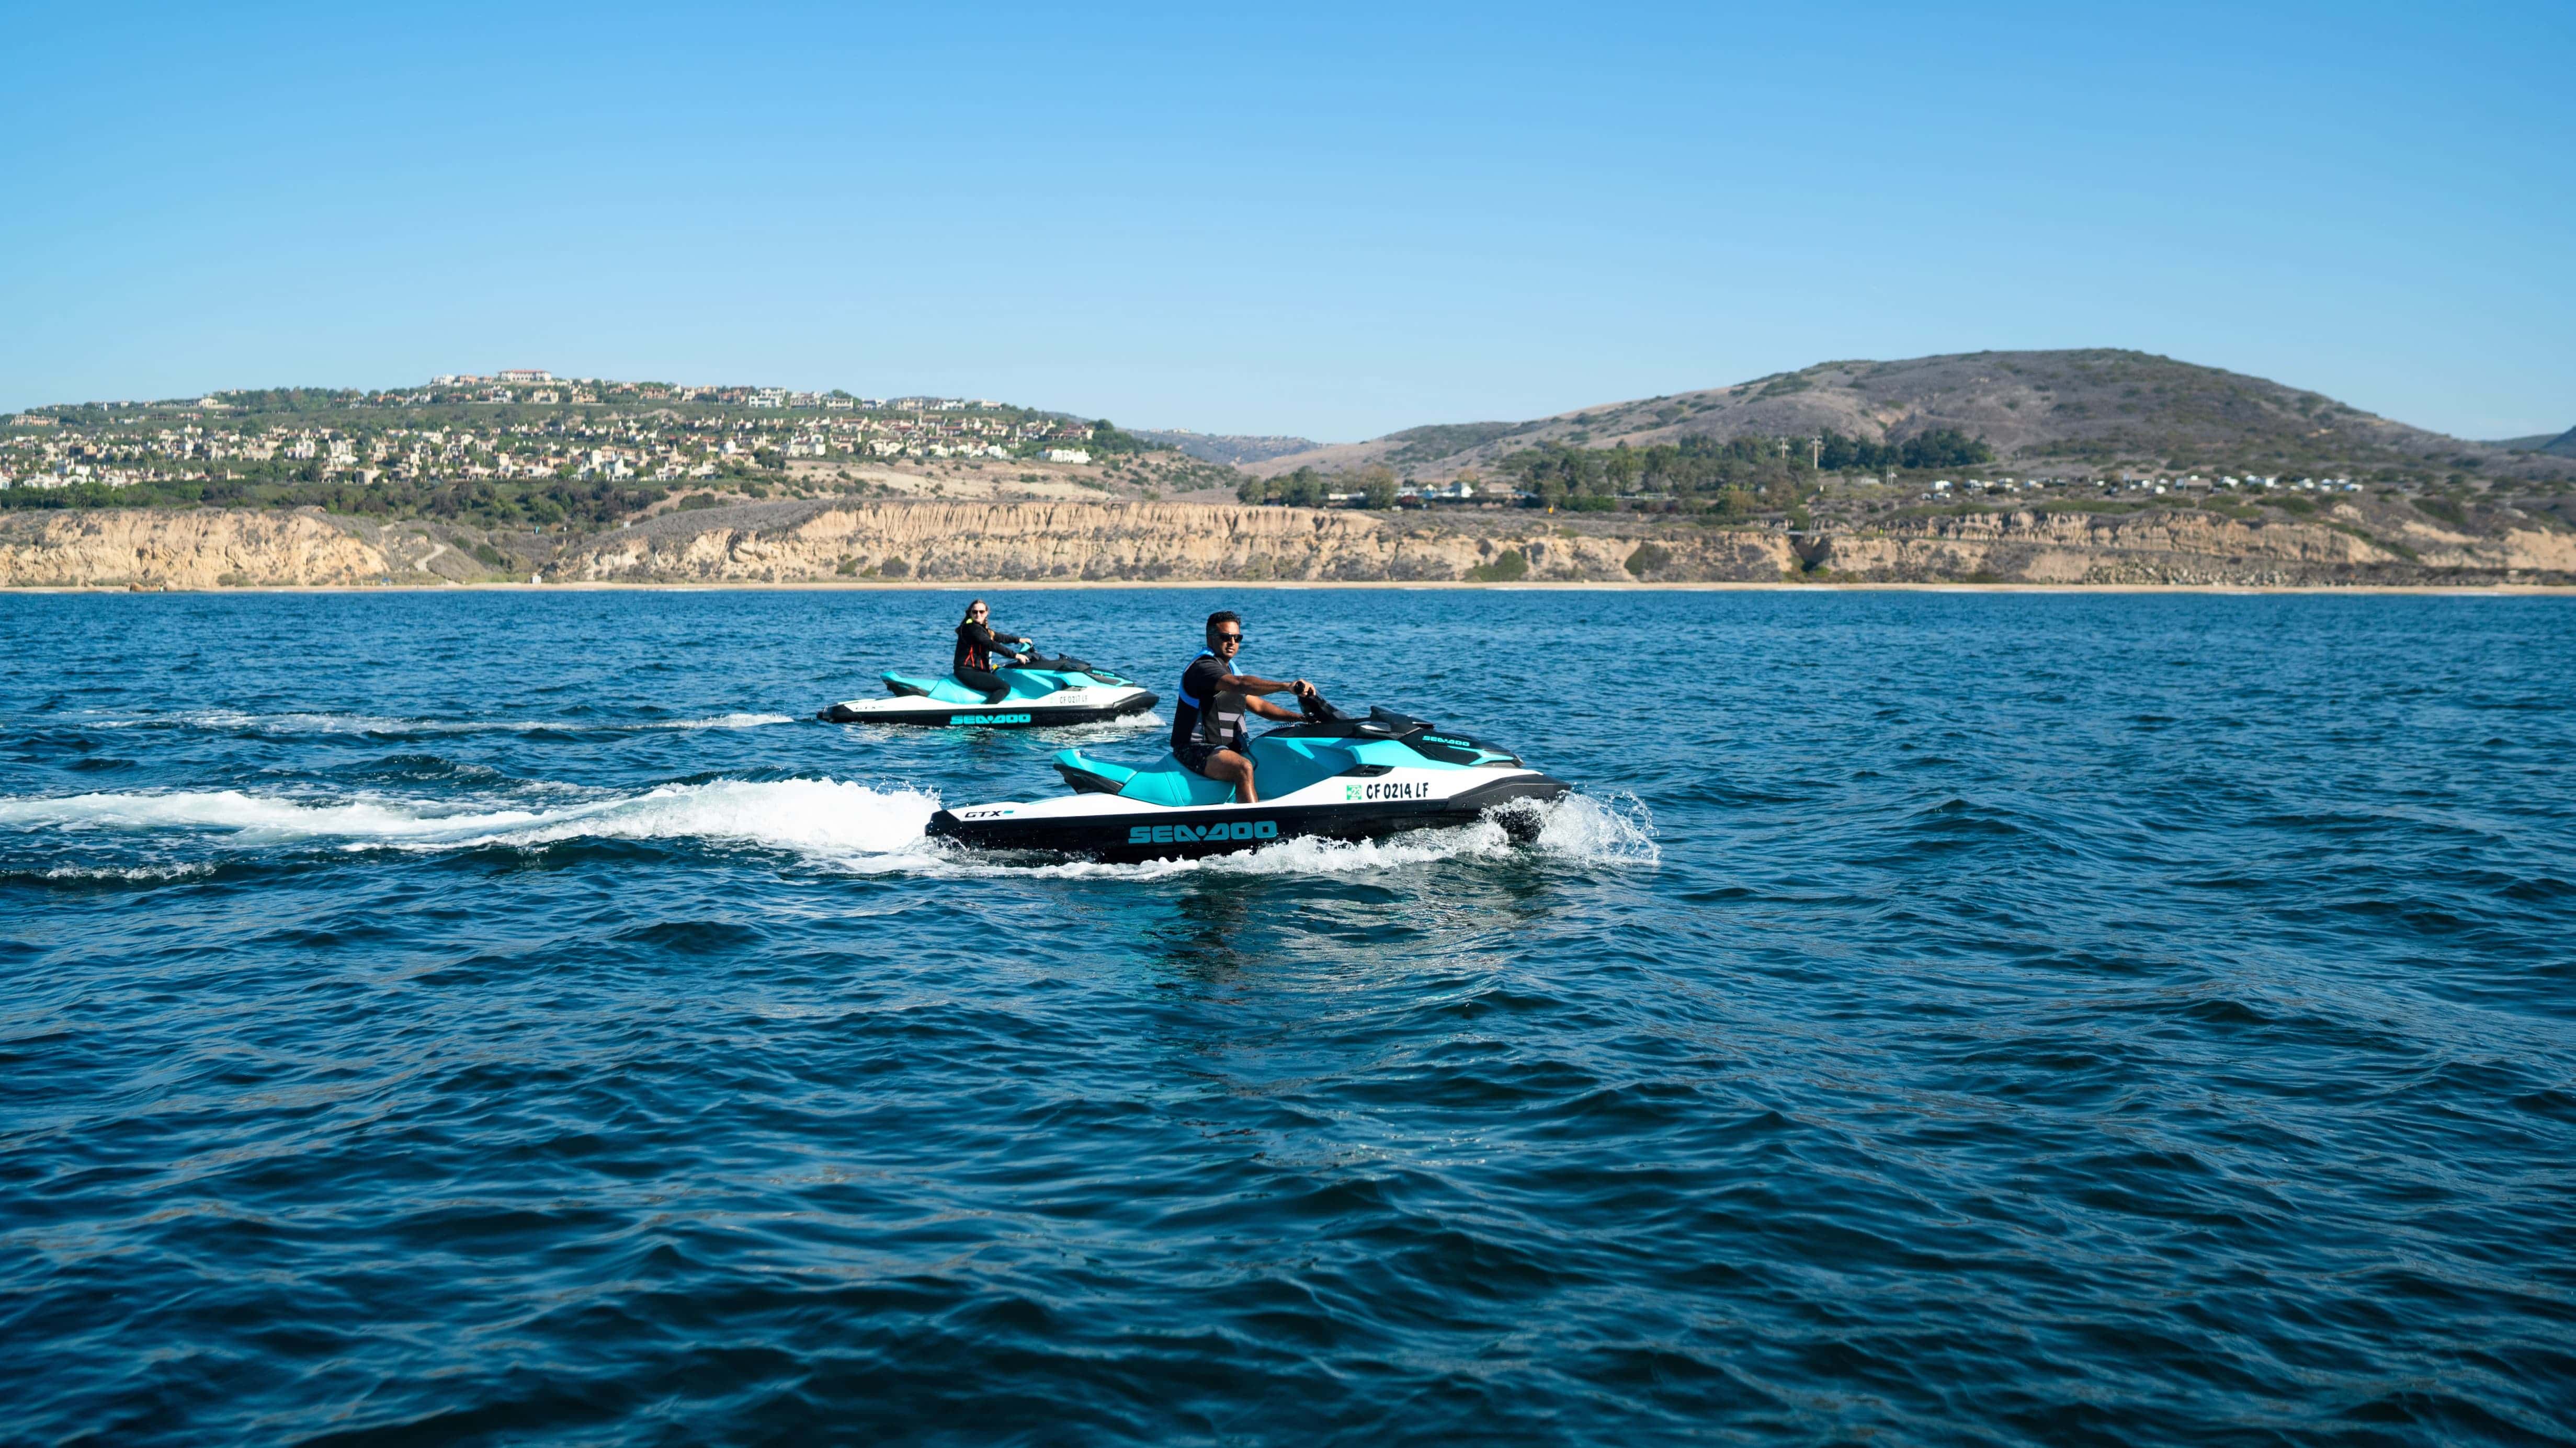 Two person riding a Sea-Doo on the californian coast